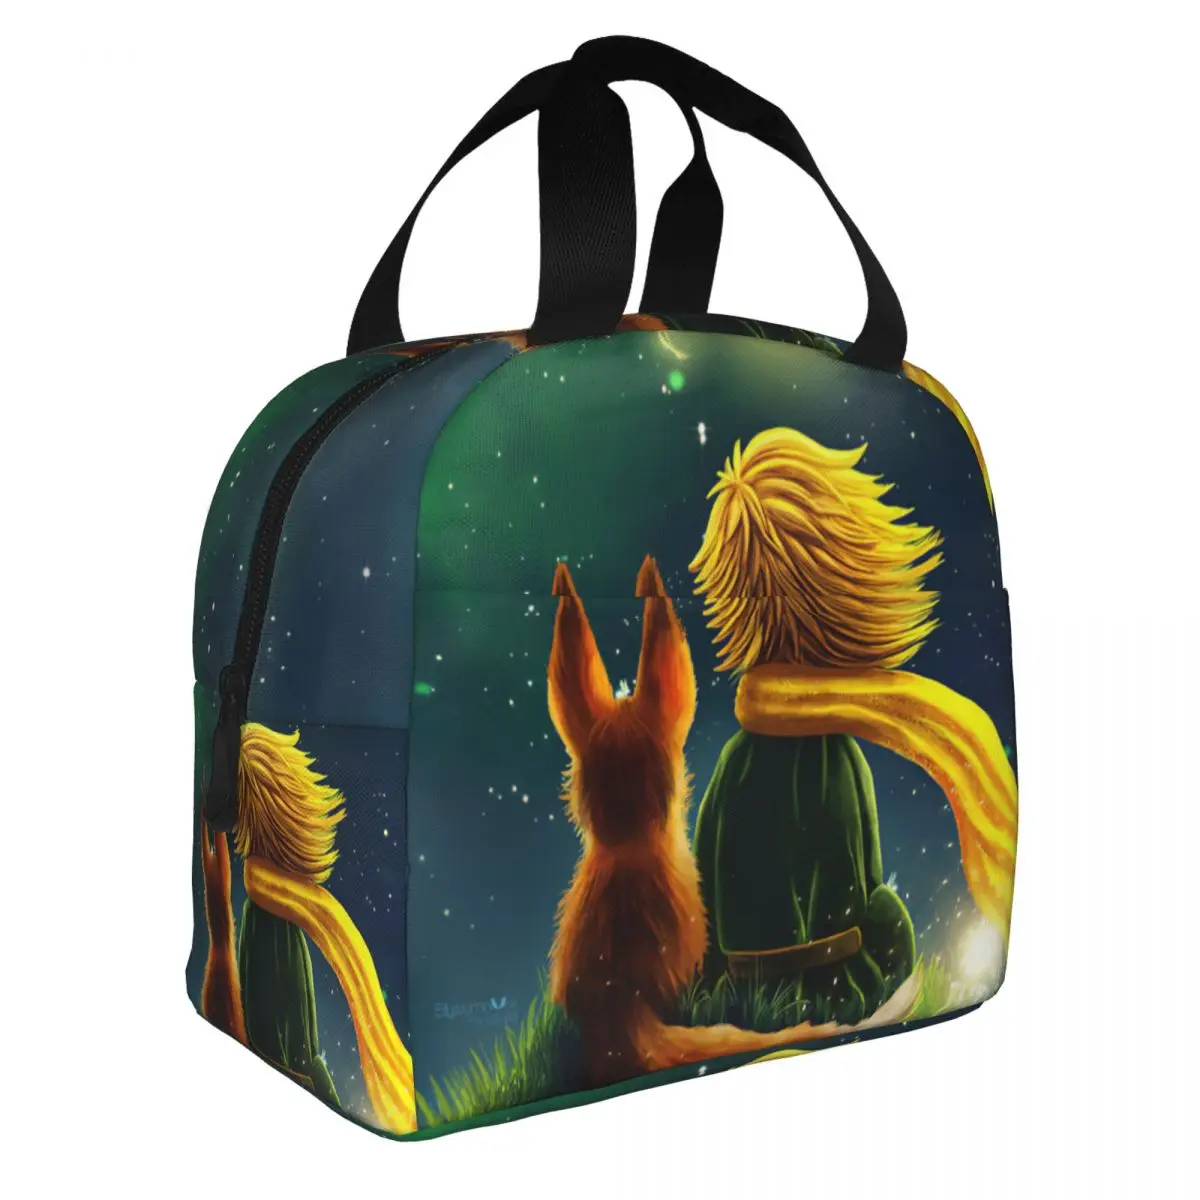 The Little Prince Lunch Bento Bags Portable Aluminum Foil thickened Thermal Cloth Lunch Bag for Women Men Boy